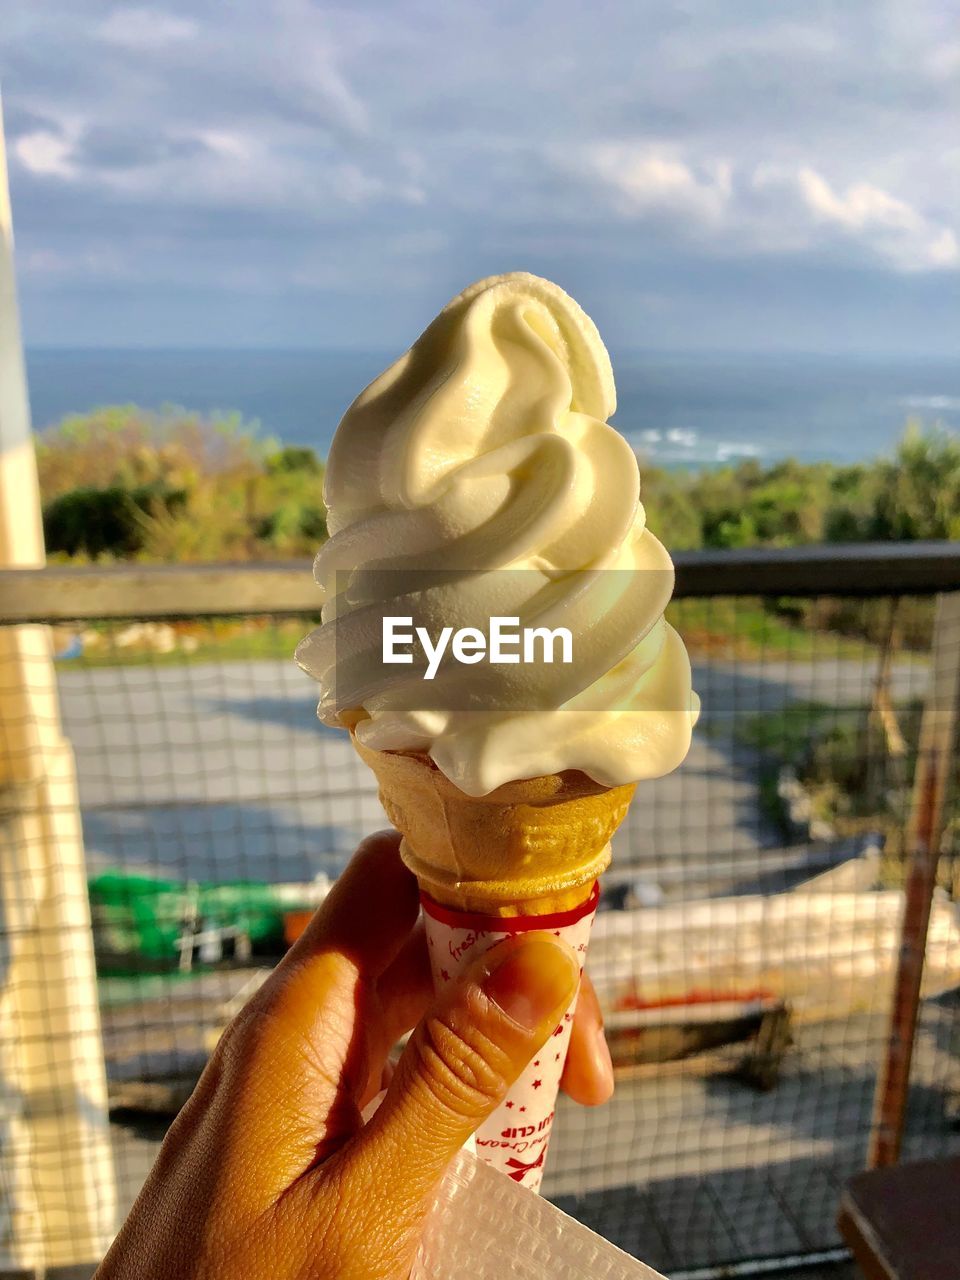 CLOSE-UP OF HAND HOLDING ICE CREAM CONE AGAINST BLURRED BACKGROUND